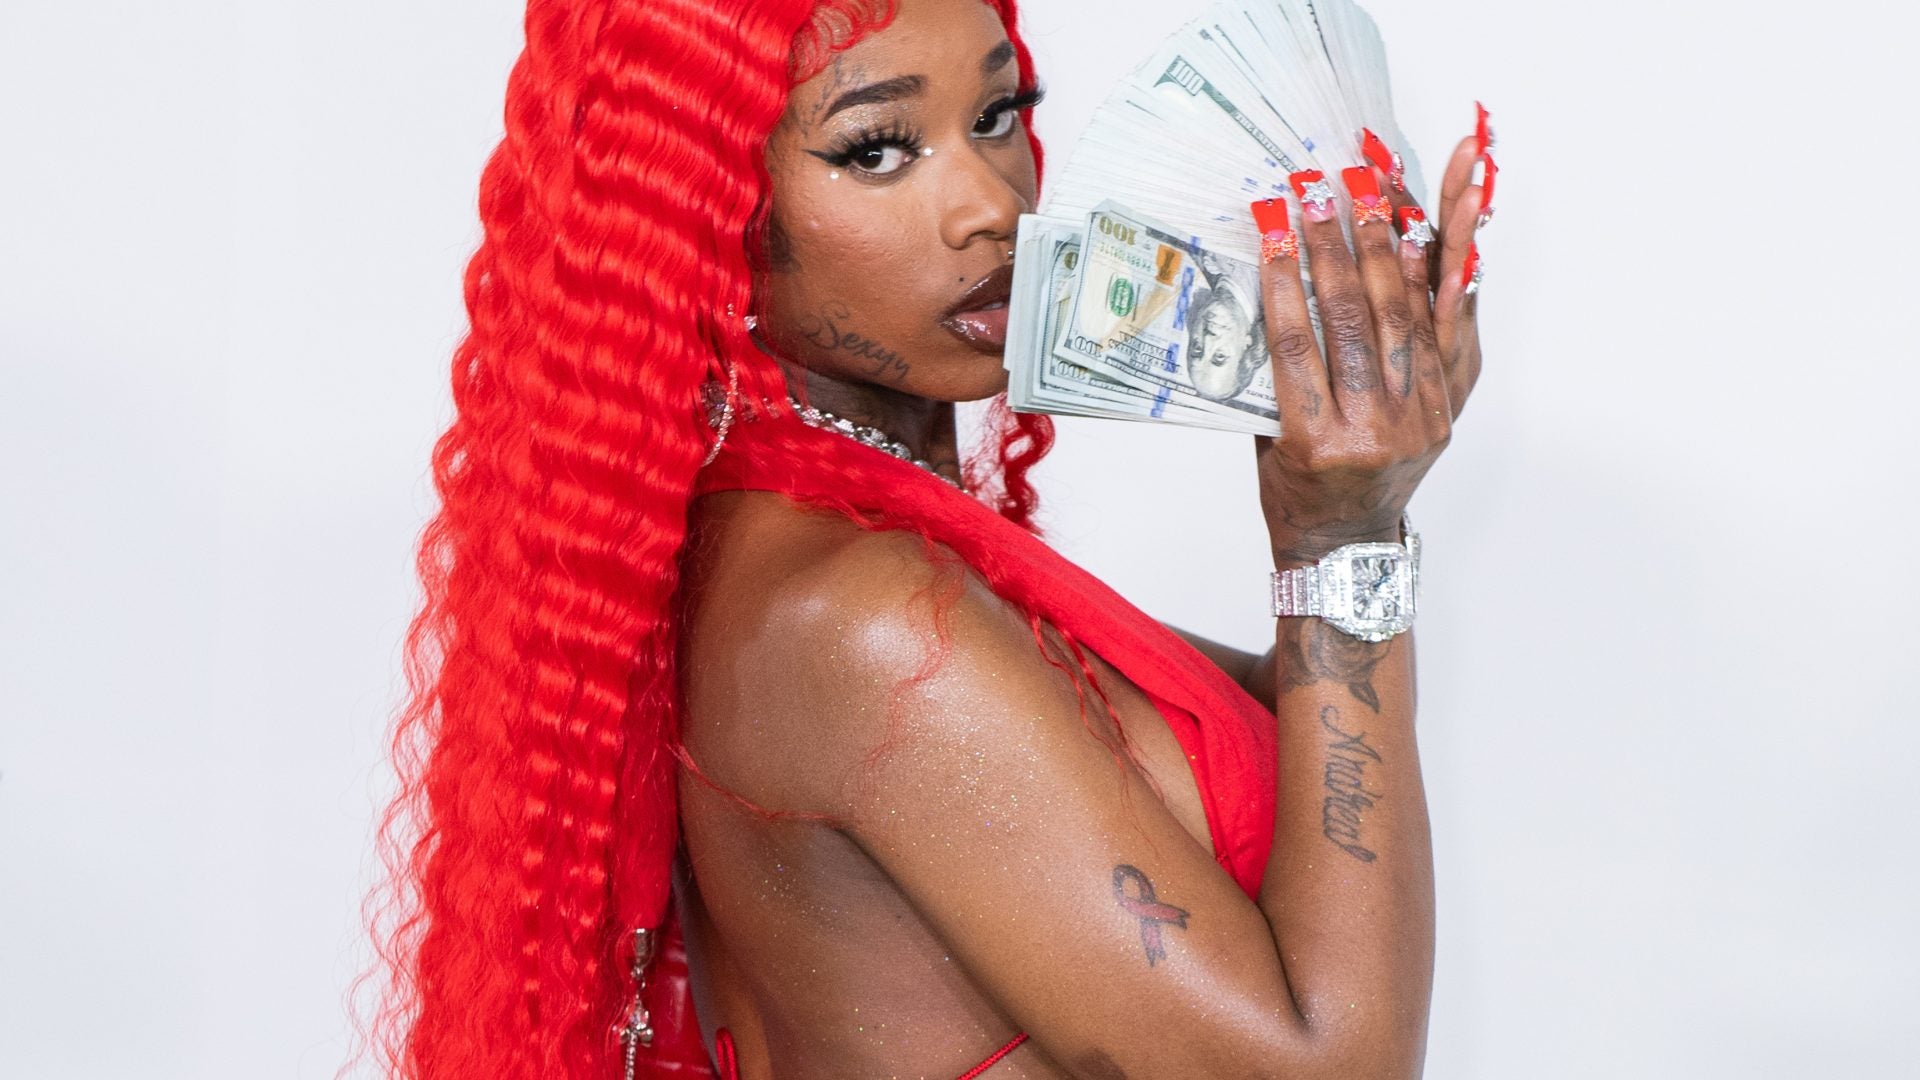 Op-Ed: Embracing Sexyy Red And The Power of Channeling Your "Inner Hood B*tch"